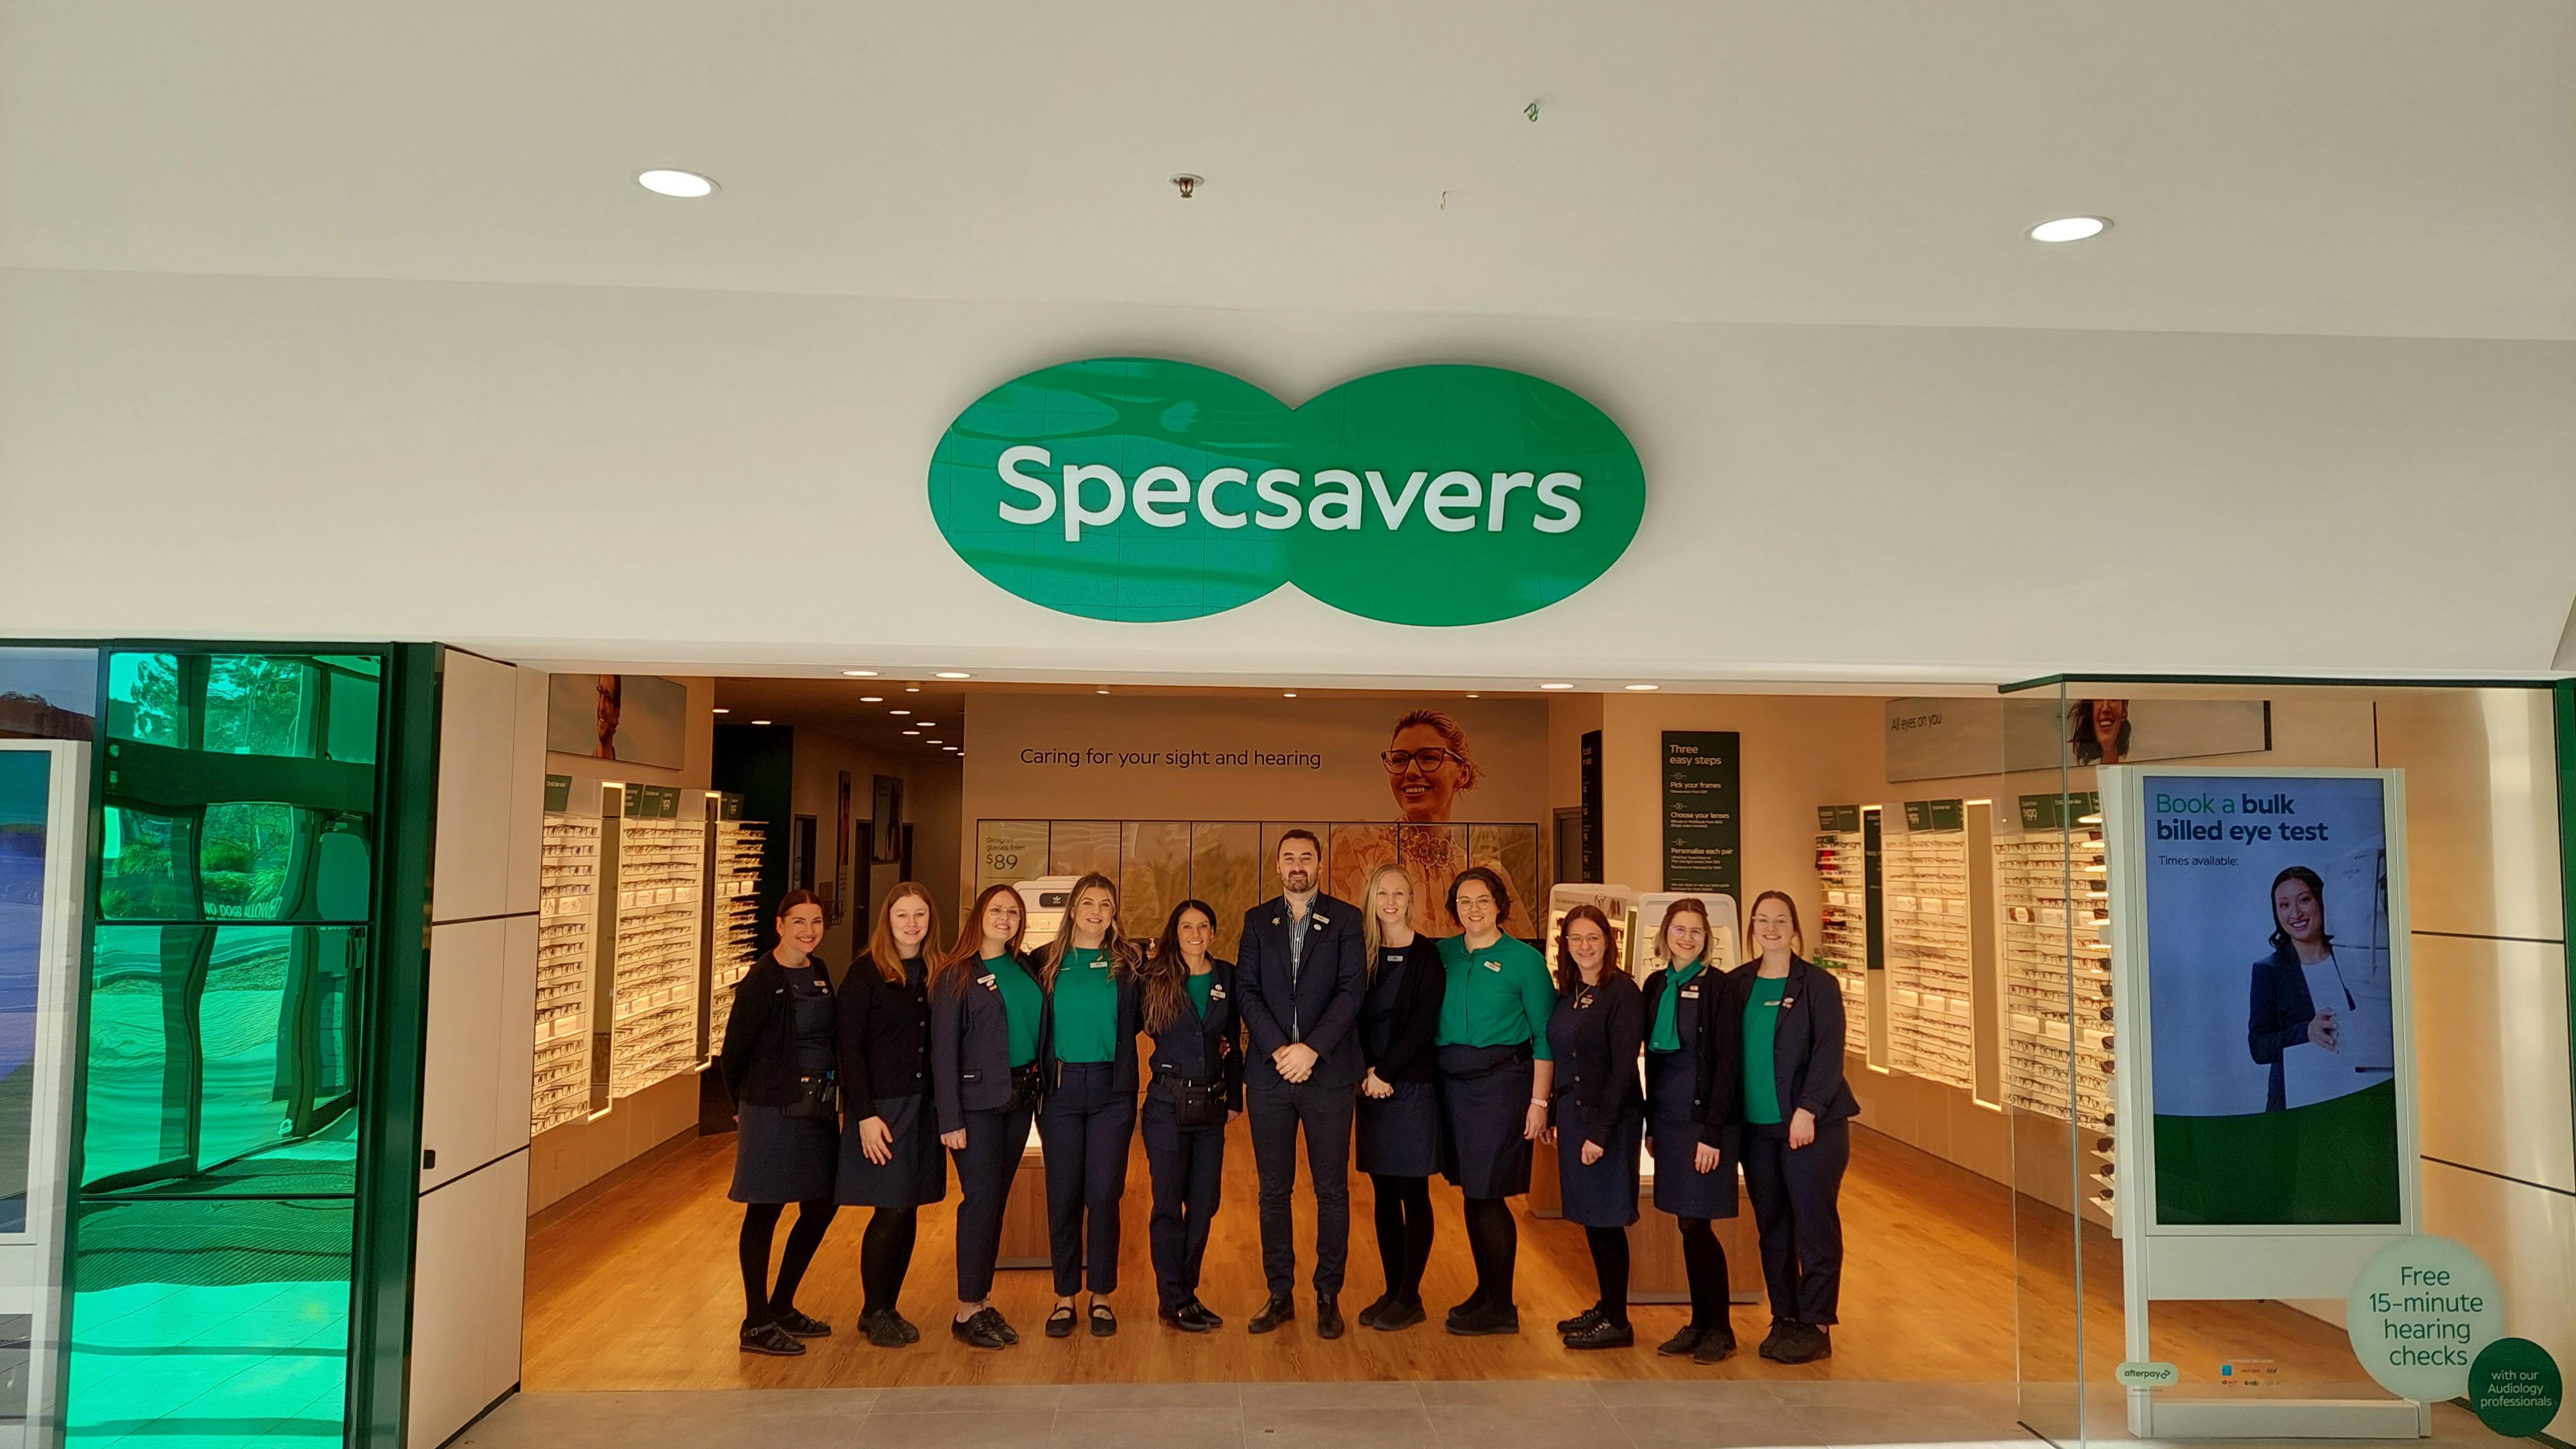 Images Specsavers Optometrists & Audiology - Berri Riverland Central Plaza